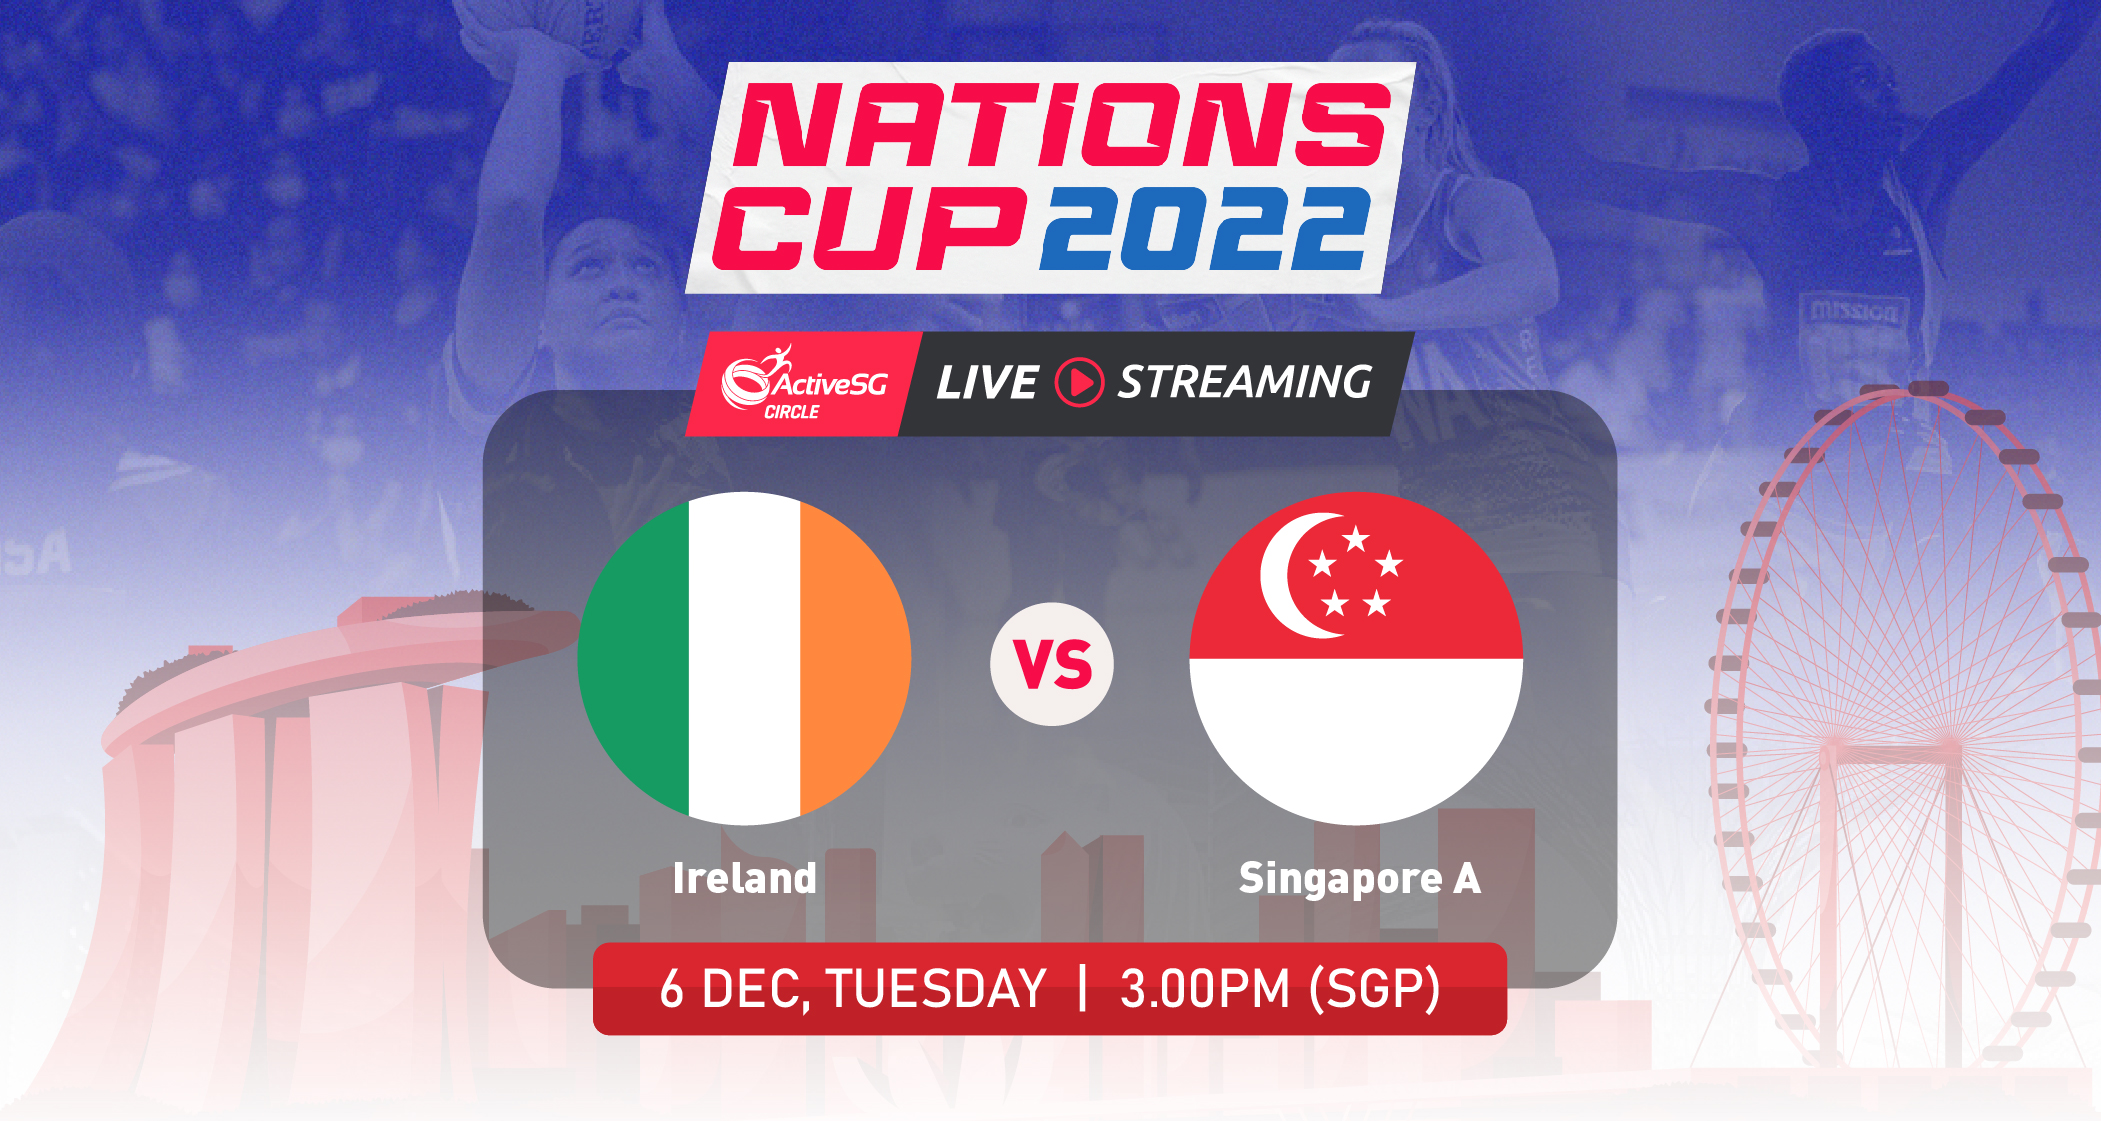 Ireland 🇮🇪 vs 🇸🇬 Singapore A | Nations Cup 2022